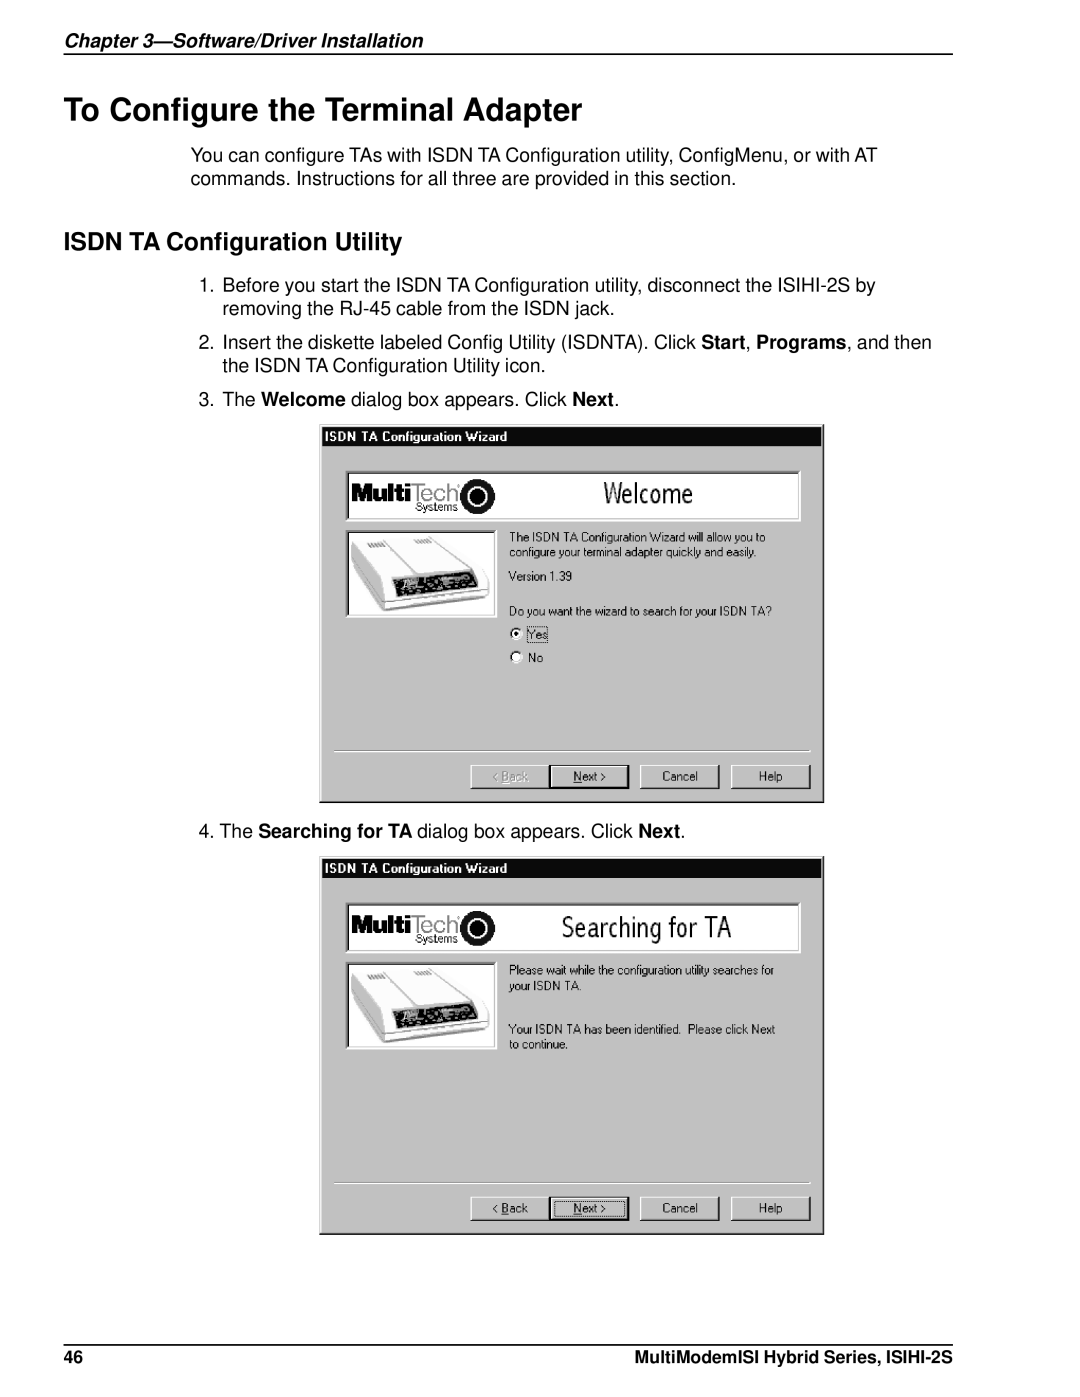 Multi Tech Equipment ISIHI-2S manual To Configure the Terminal Adapter, Isdn TA Configuration Utility 